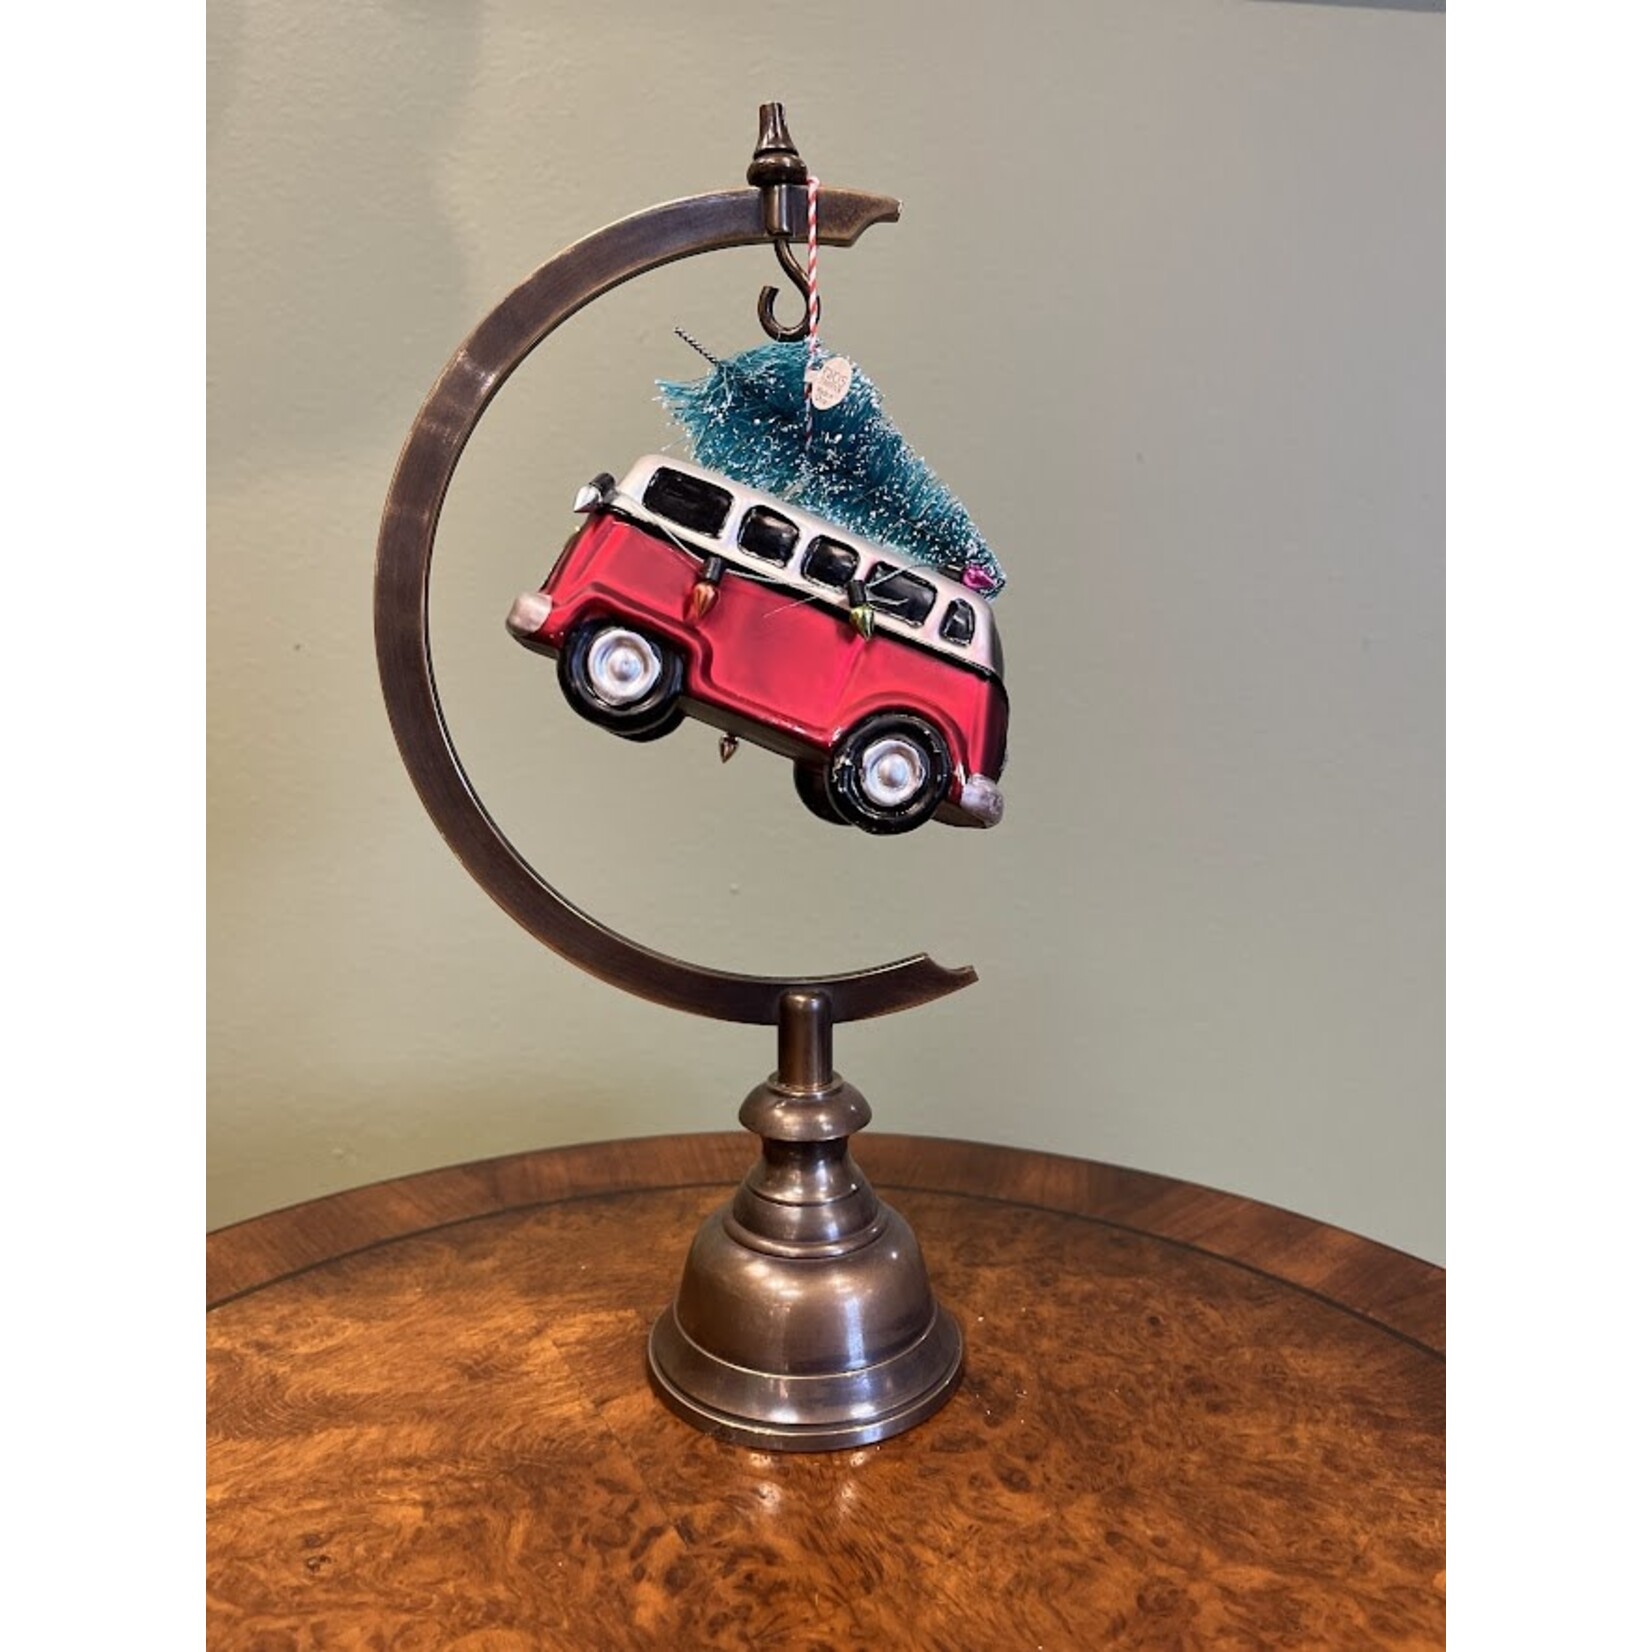 Two's Company Vintage Car Ornament with Tree